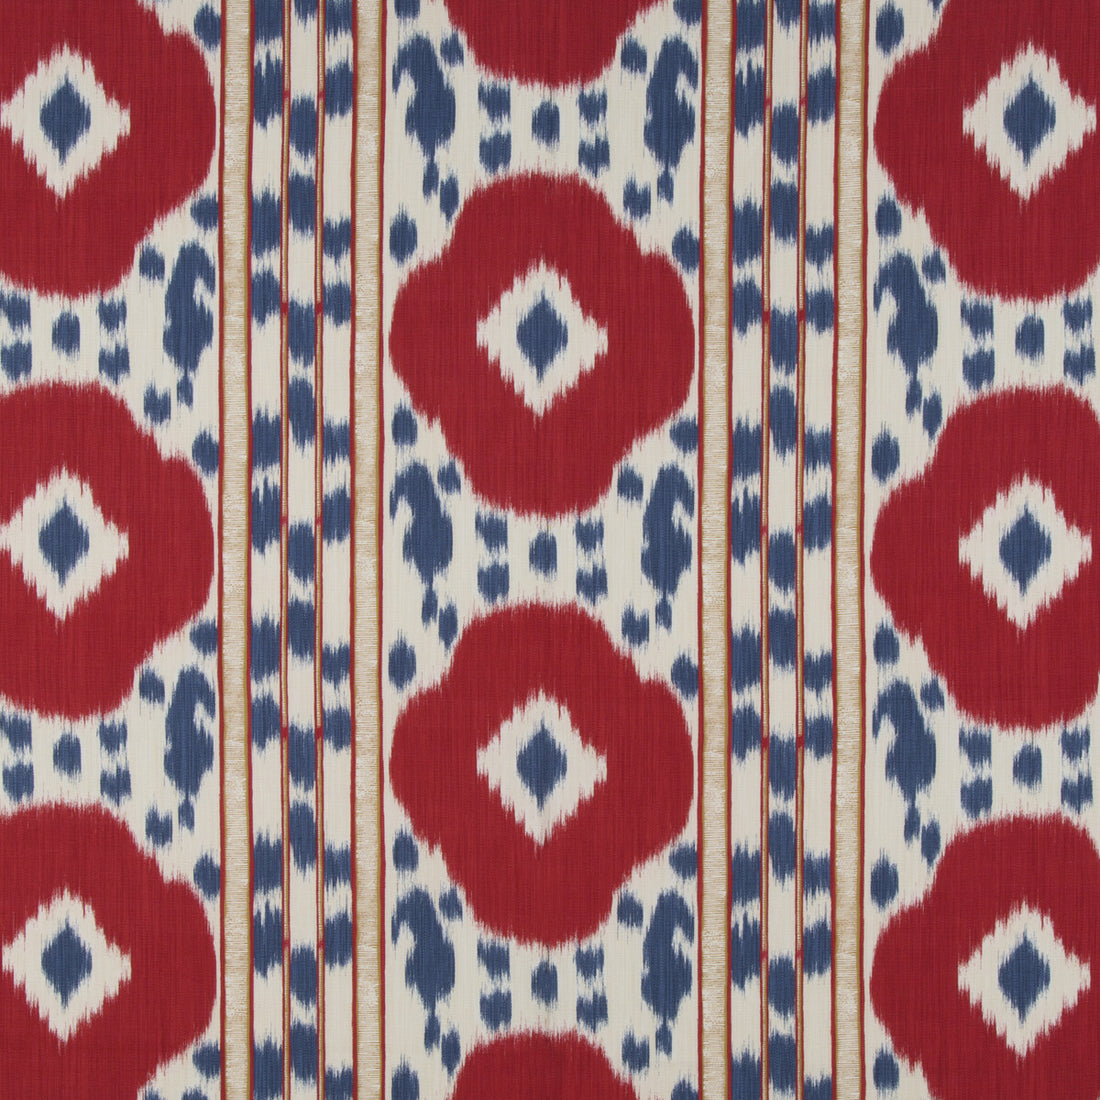 Varkala Print fabric in red/blue color - pattern 8015178.195.0 - by Brunschwig &amp; Fils in the Cape Comorin collection